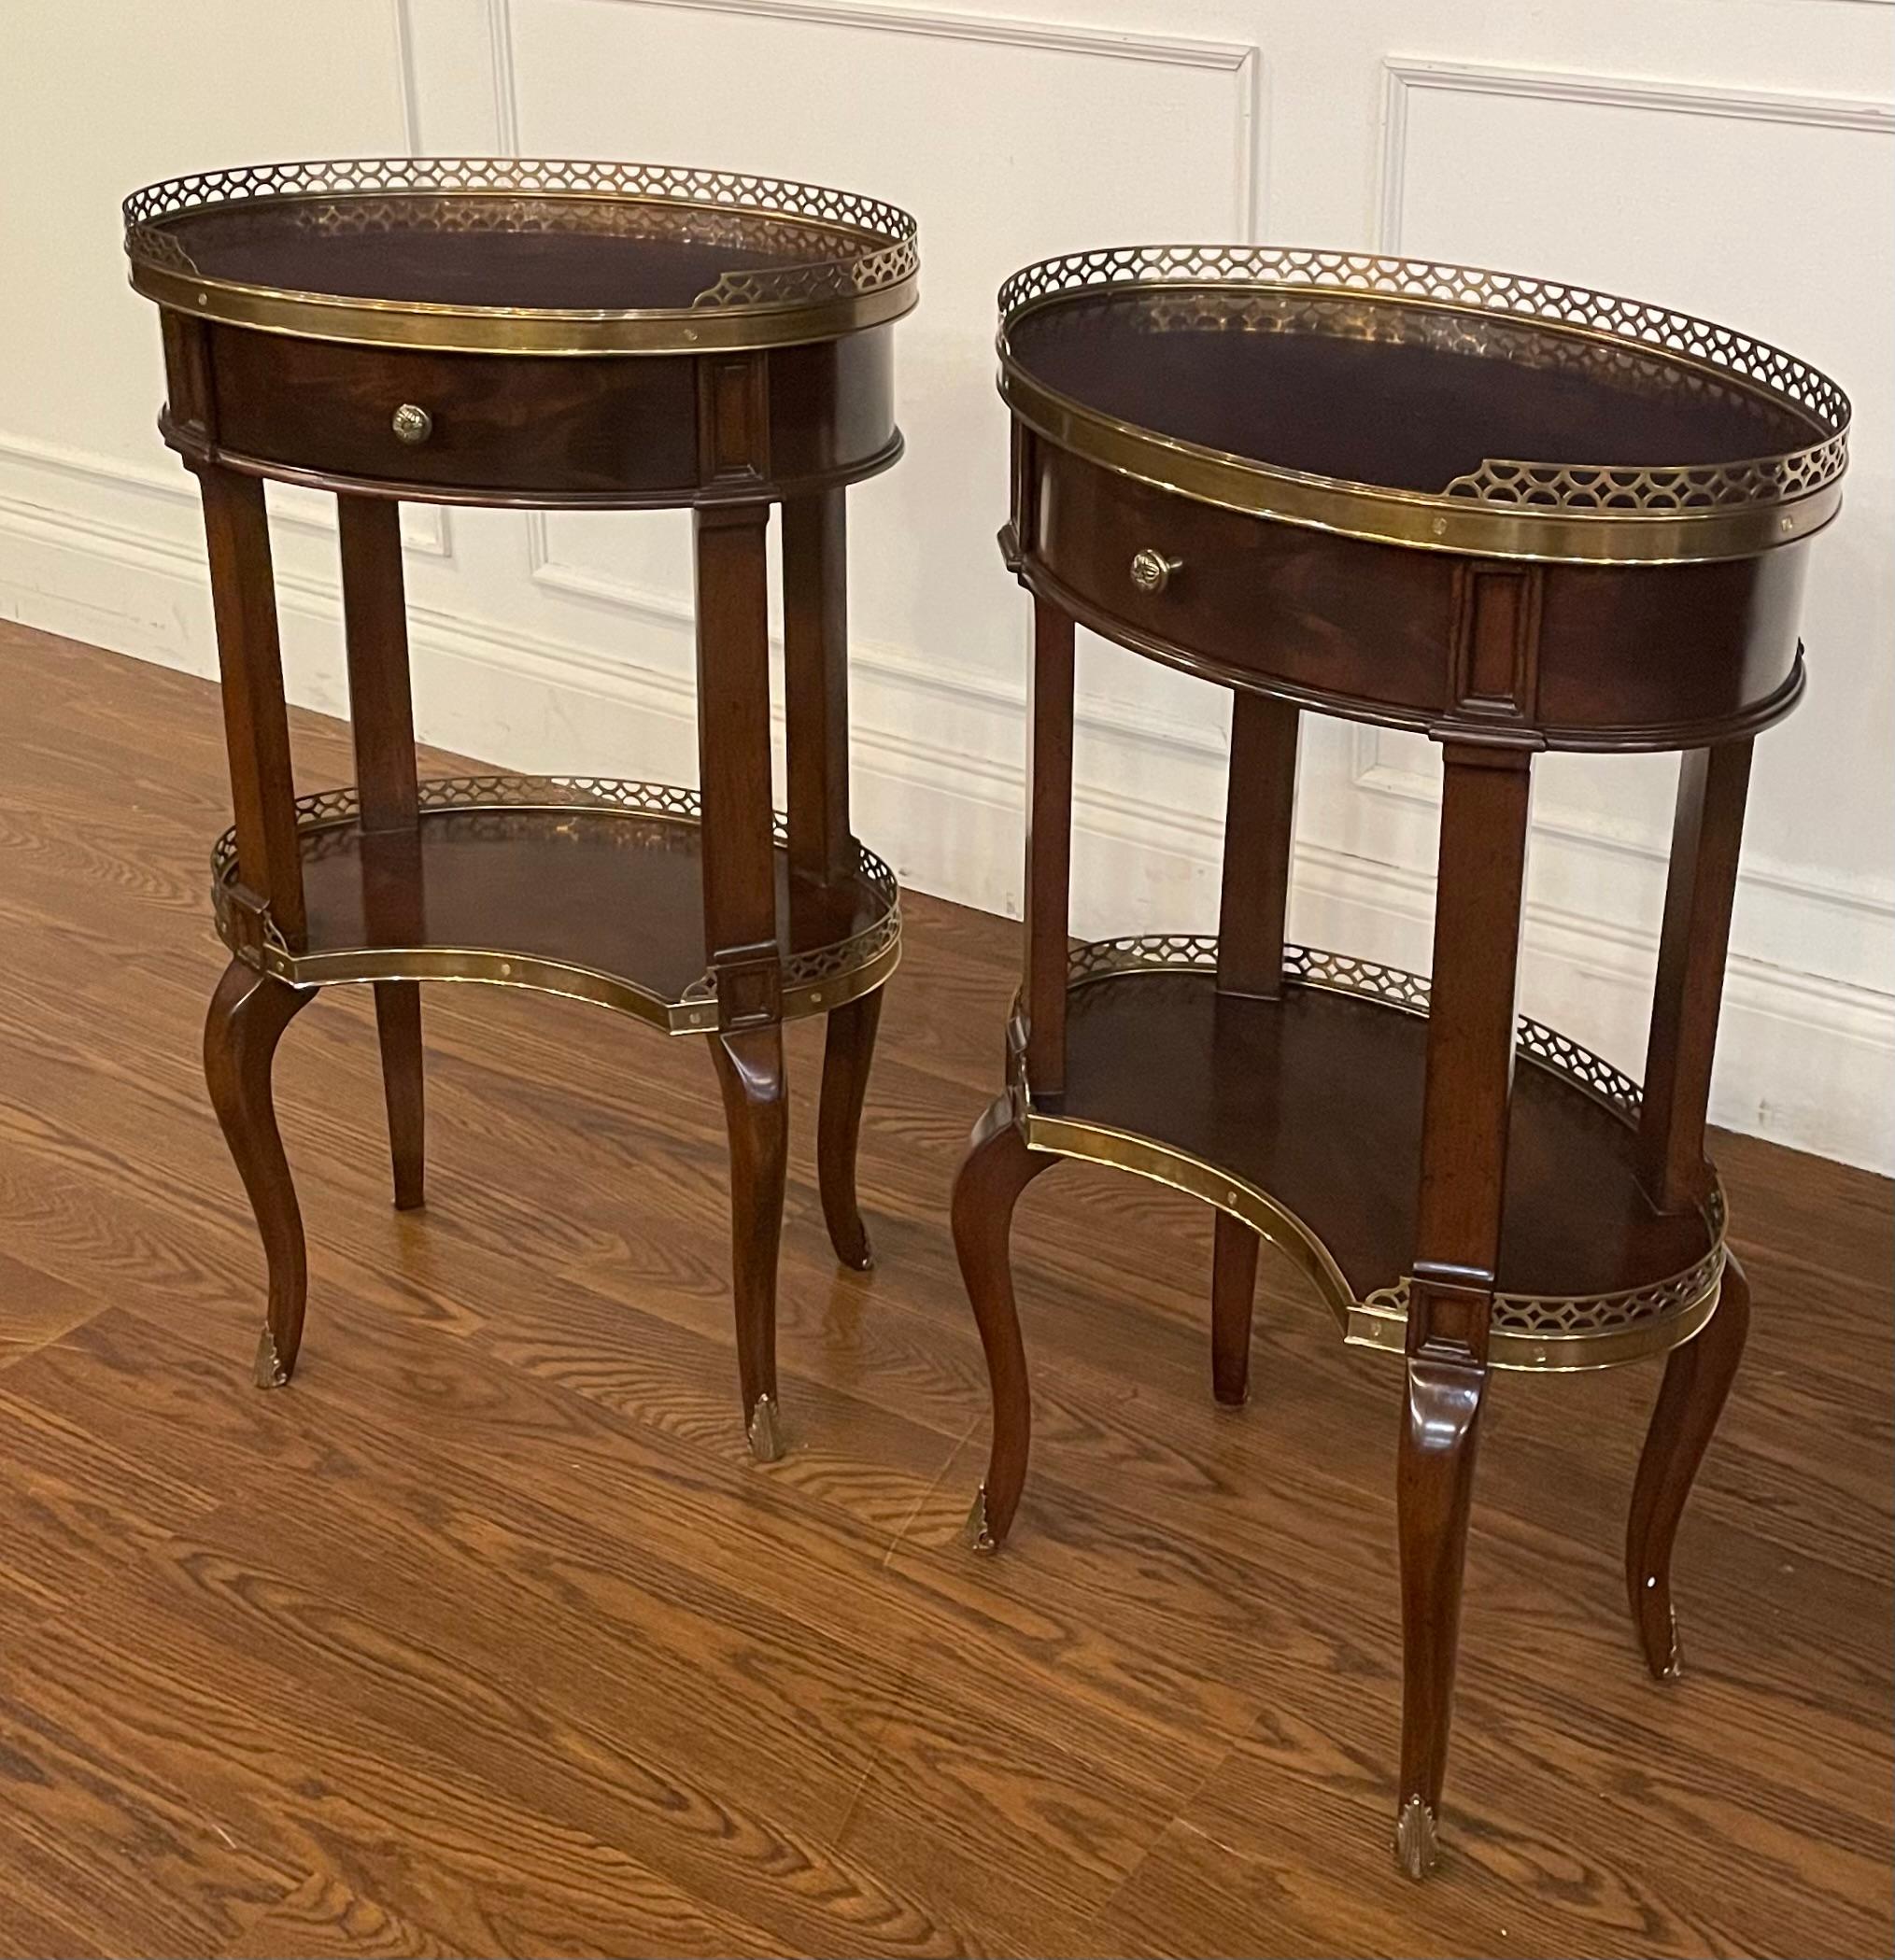 Regency Pair of Kidney Shaped Mahogany Lamp Tables by Leighton Hall - Showroom Samples For Sale